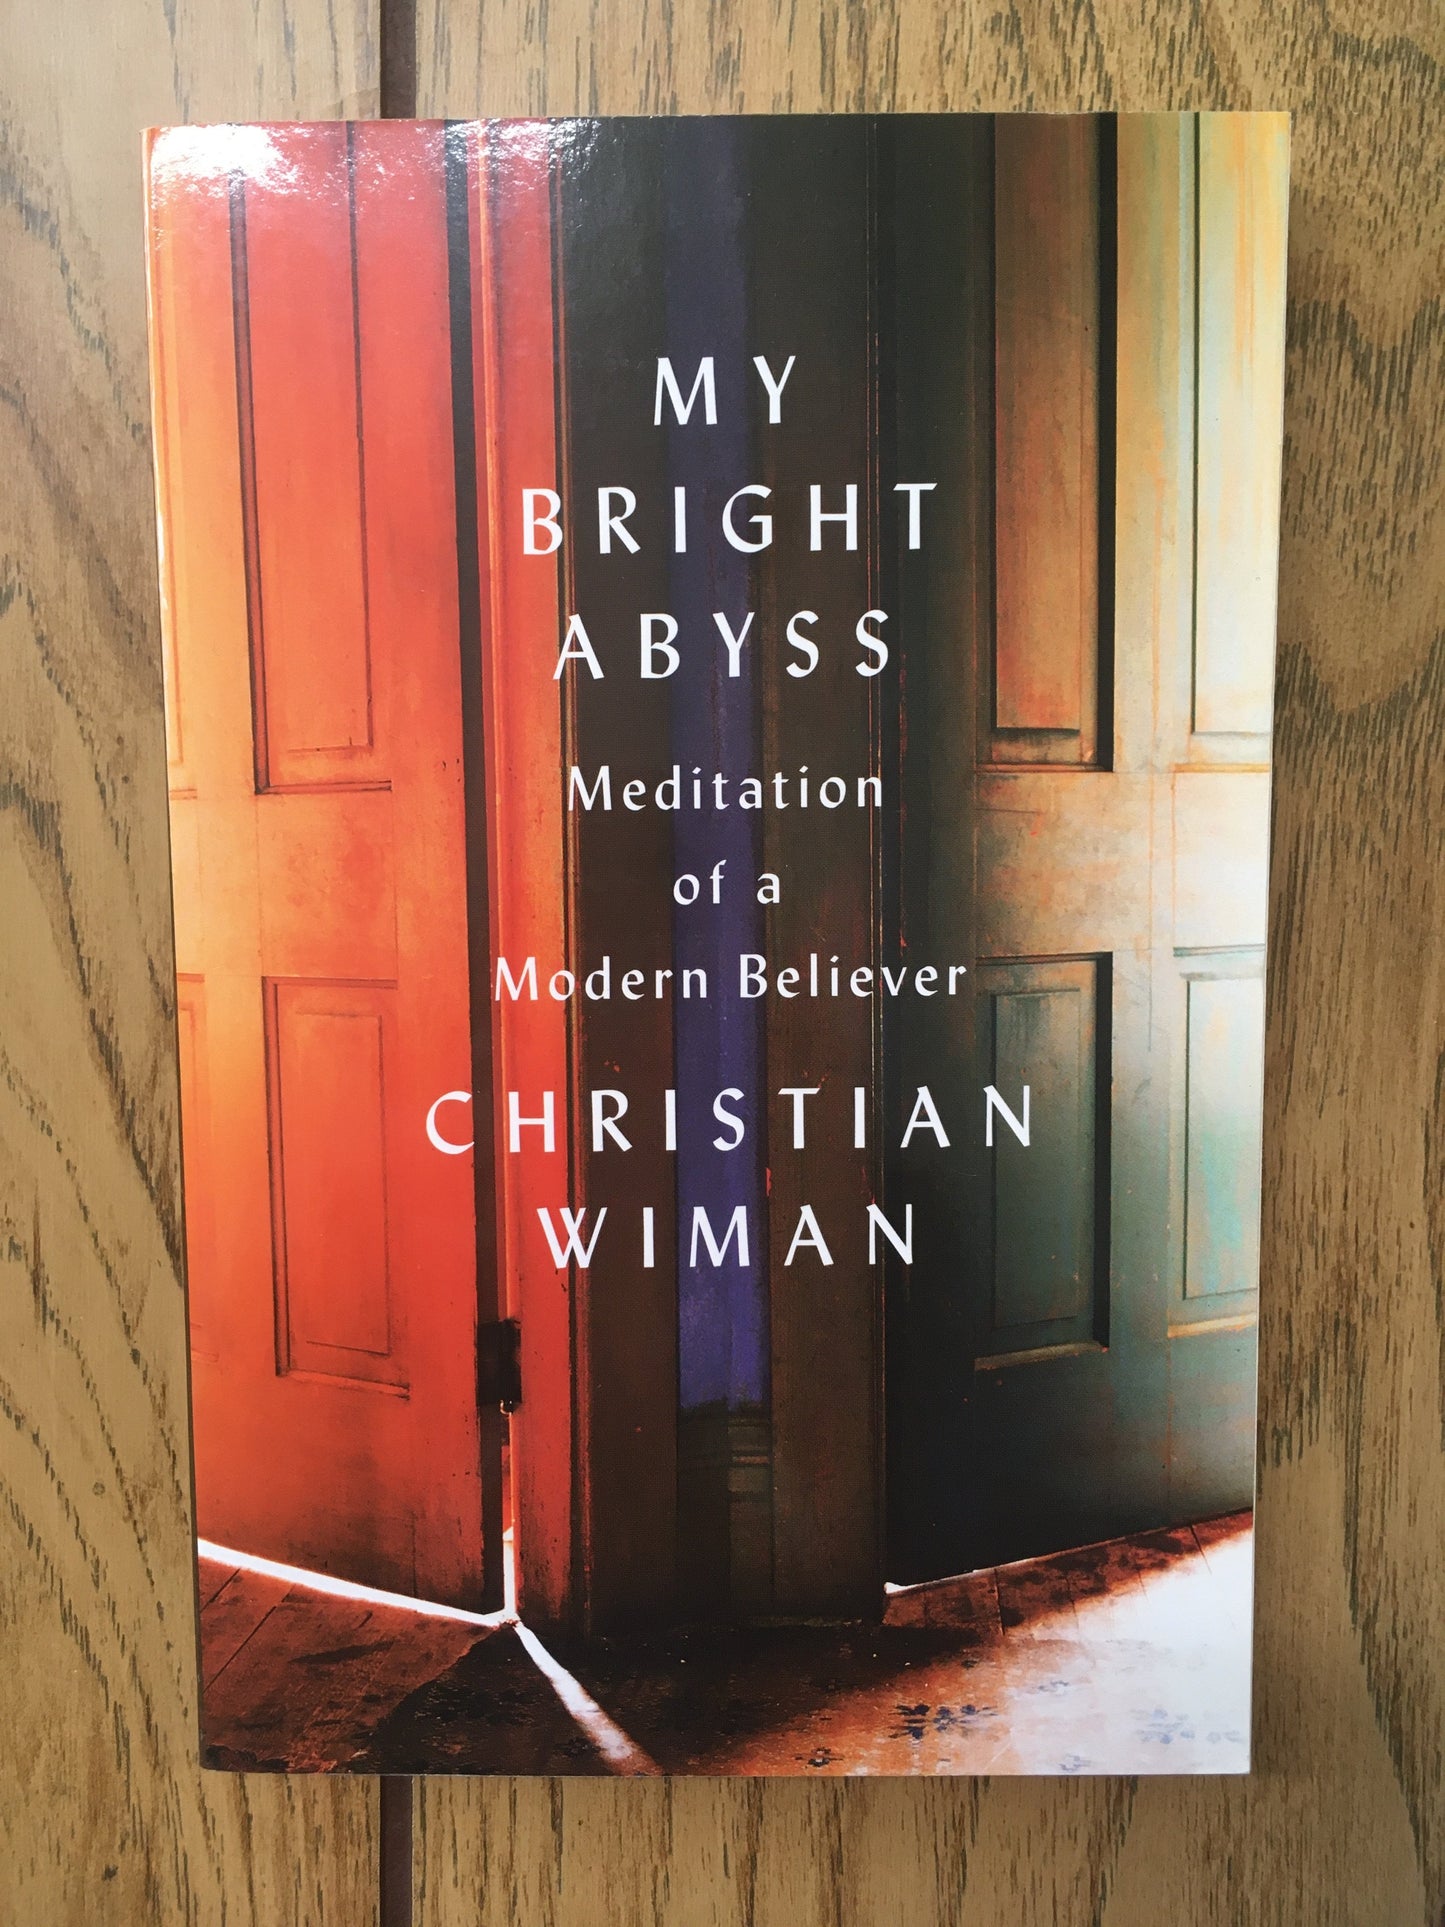 My Bright Abyss: Mediation of a Modern Believer